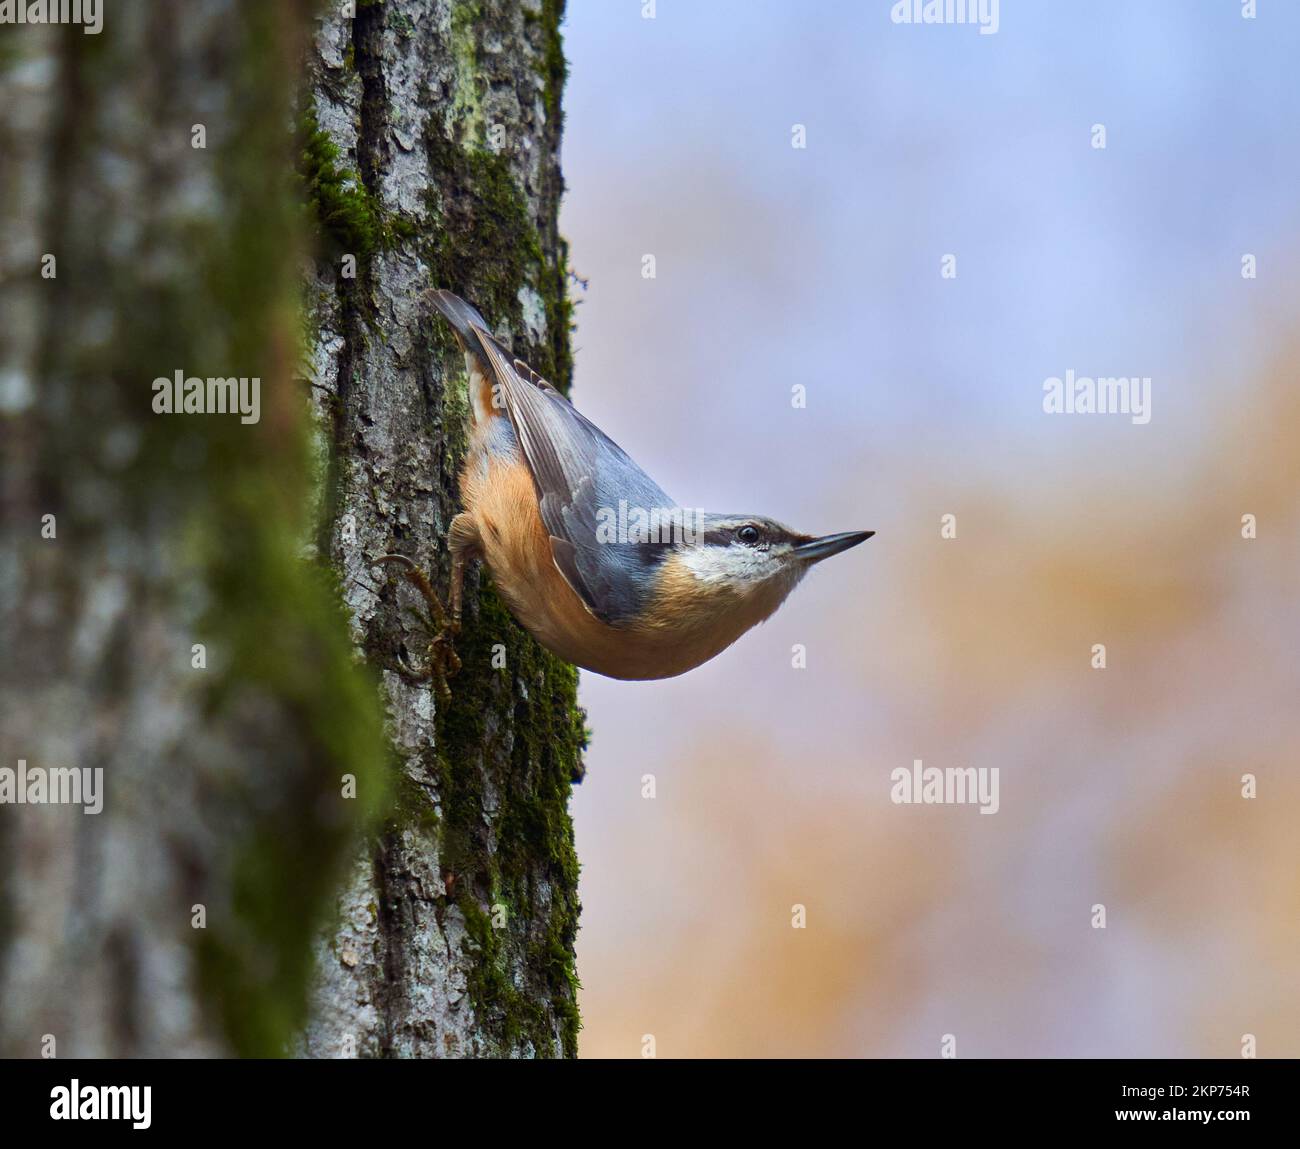 European nuthatch (Sitta europaea) perched on a tree Stock Photo